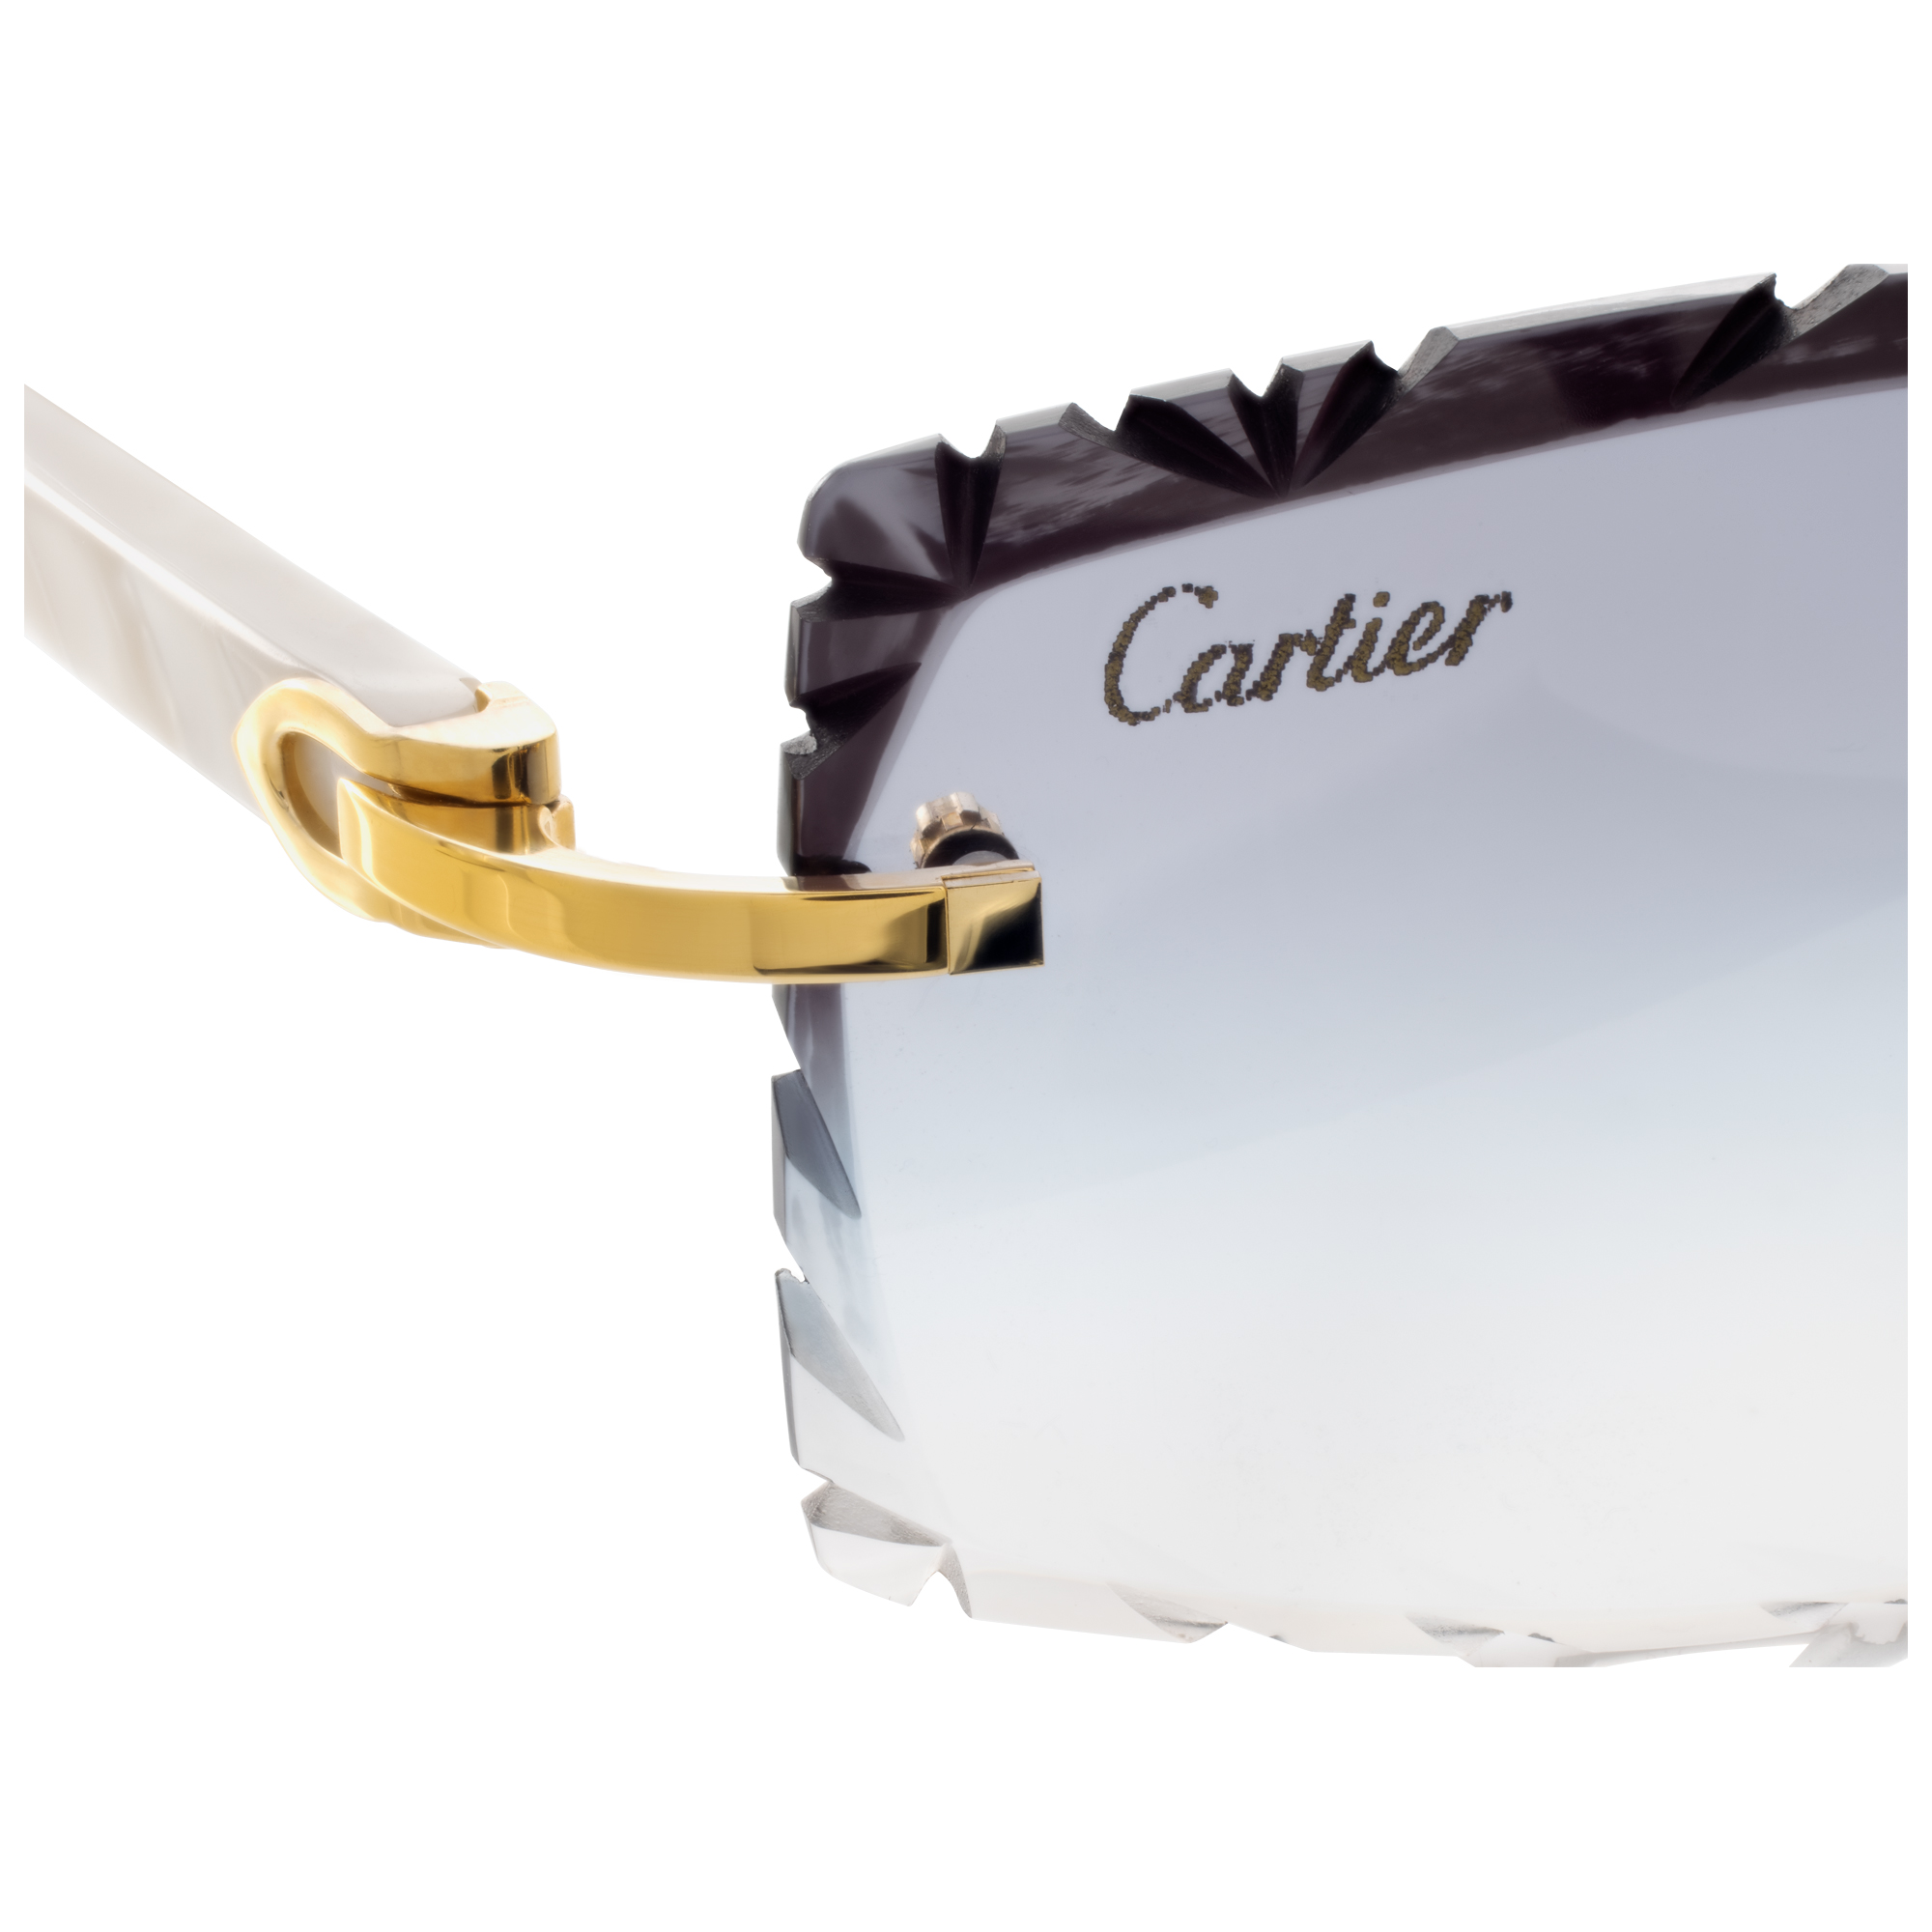 Cartier Pearl White Rimless Eyeglasses converted into sunglasses with beveled blue lens image 5